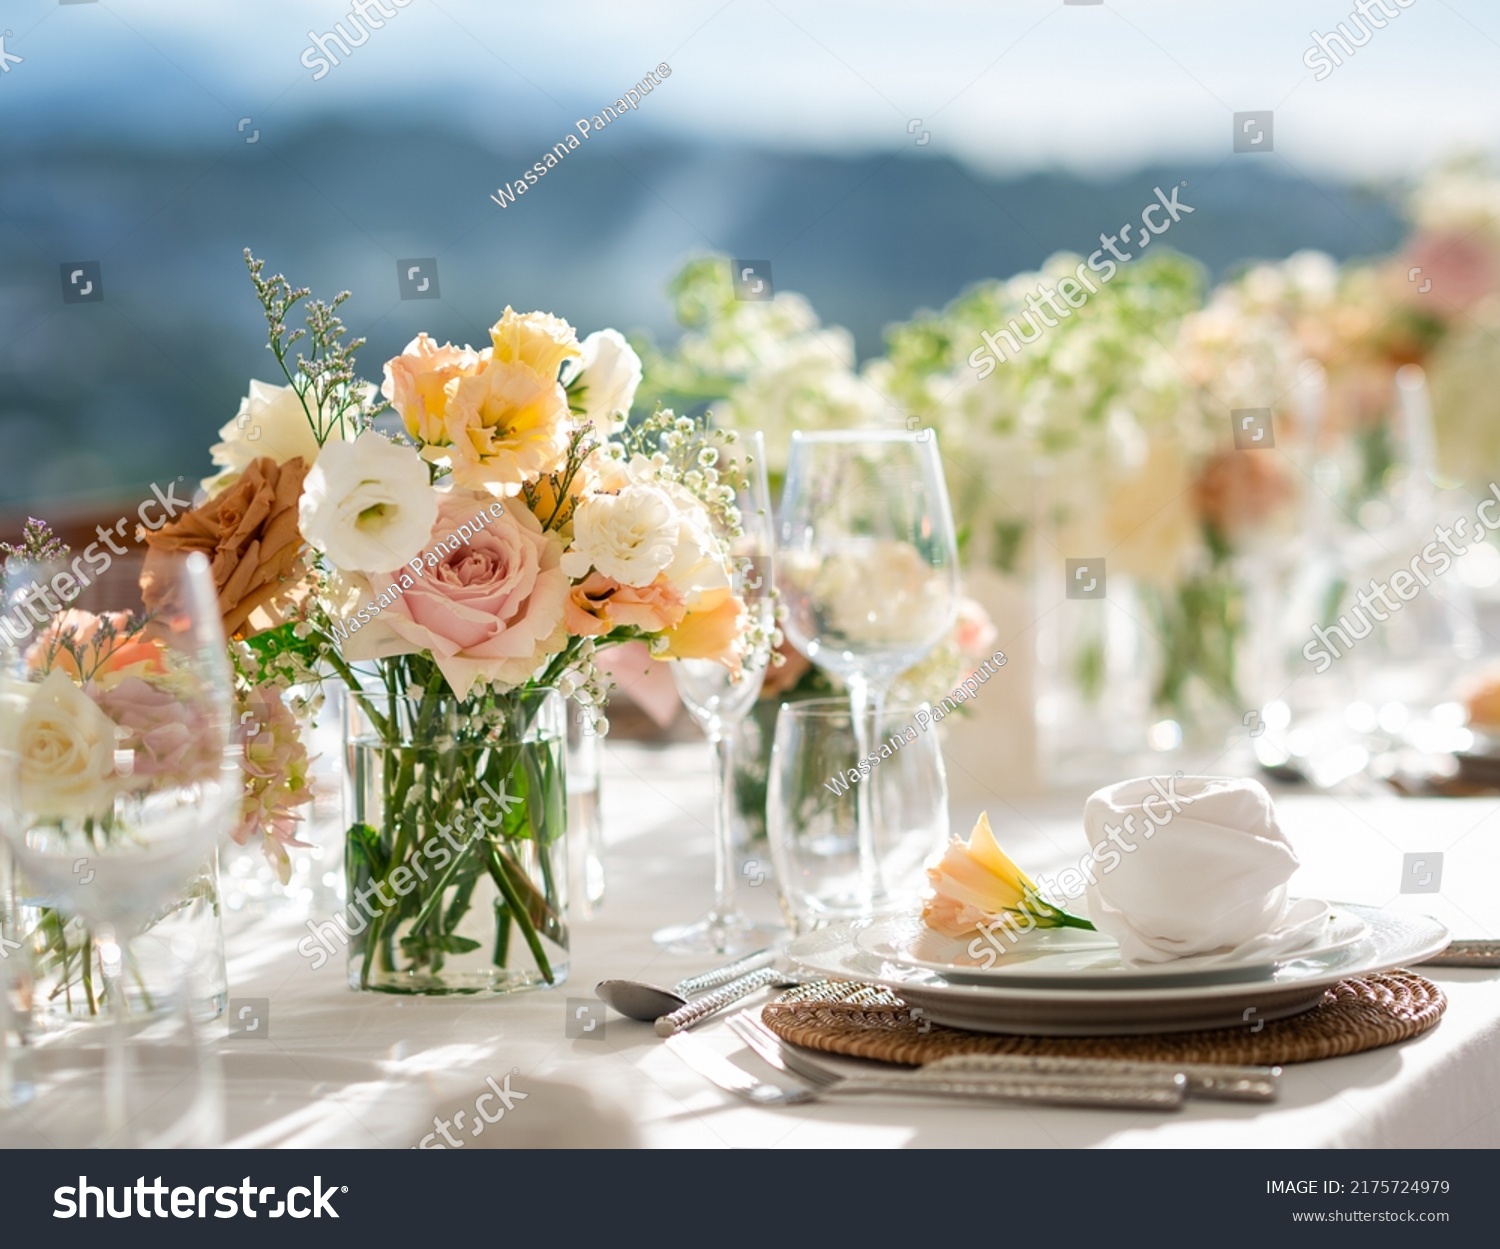 Beautiful flowers decorated on the table.Tables set for an event party or wedding reception. luxury elegant table setting dinner in a restaurant. glasses and dishes. Fancy moment fancy time. #2175724979